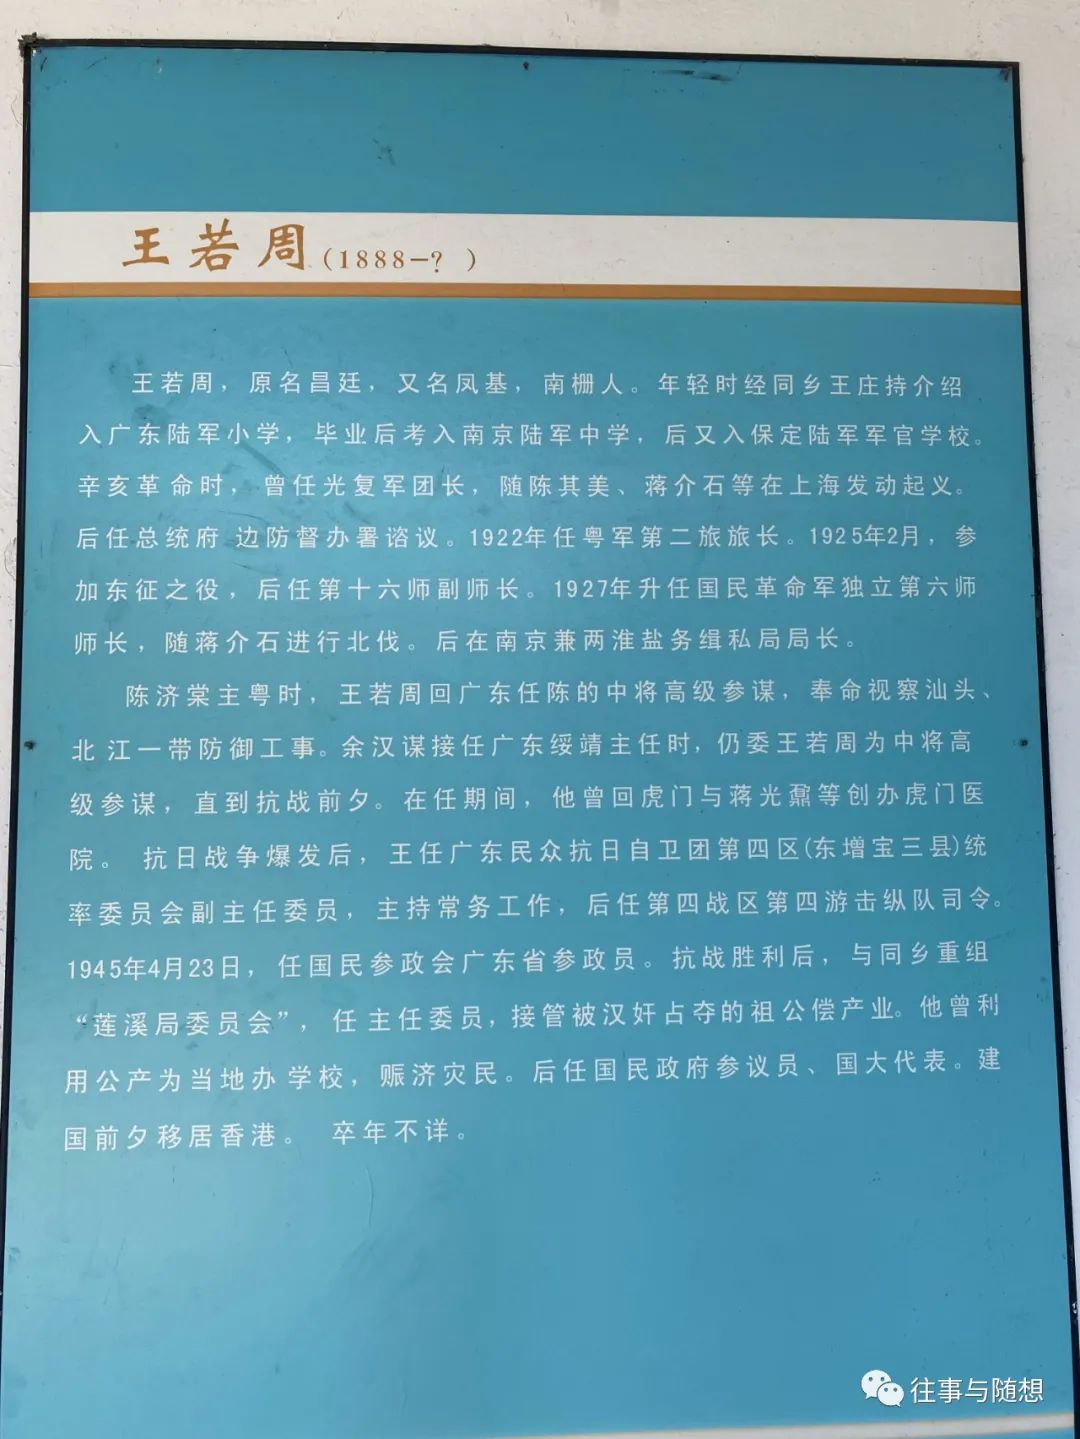 Blue poster with a lengthy biographical text in Chinese about a man named Wang Ruozhou, born 1888, year of death unknown